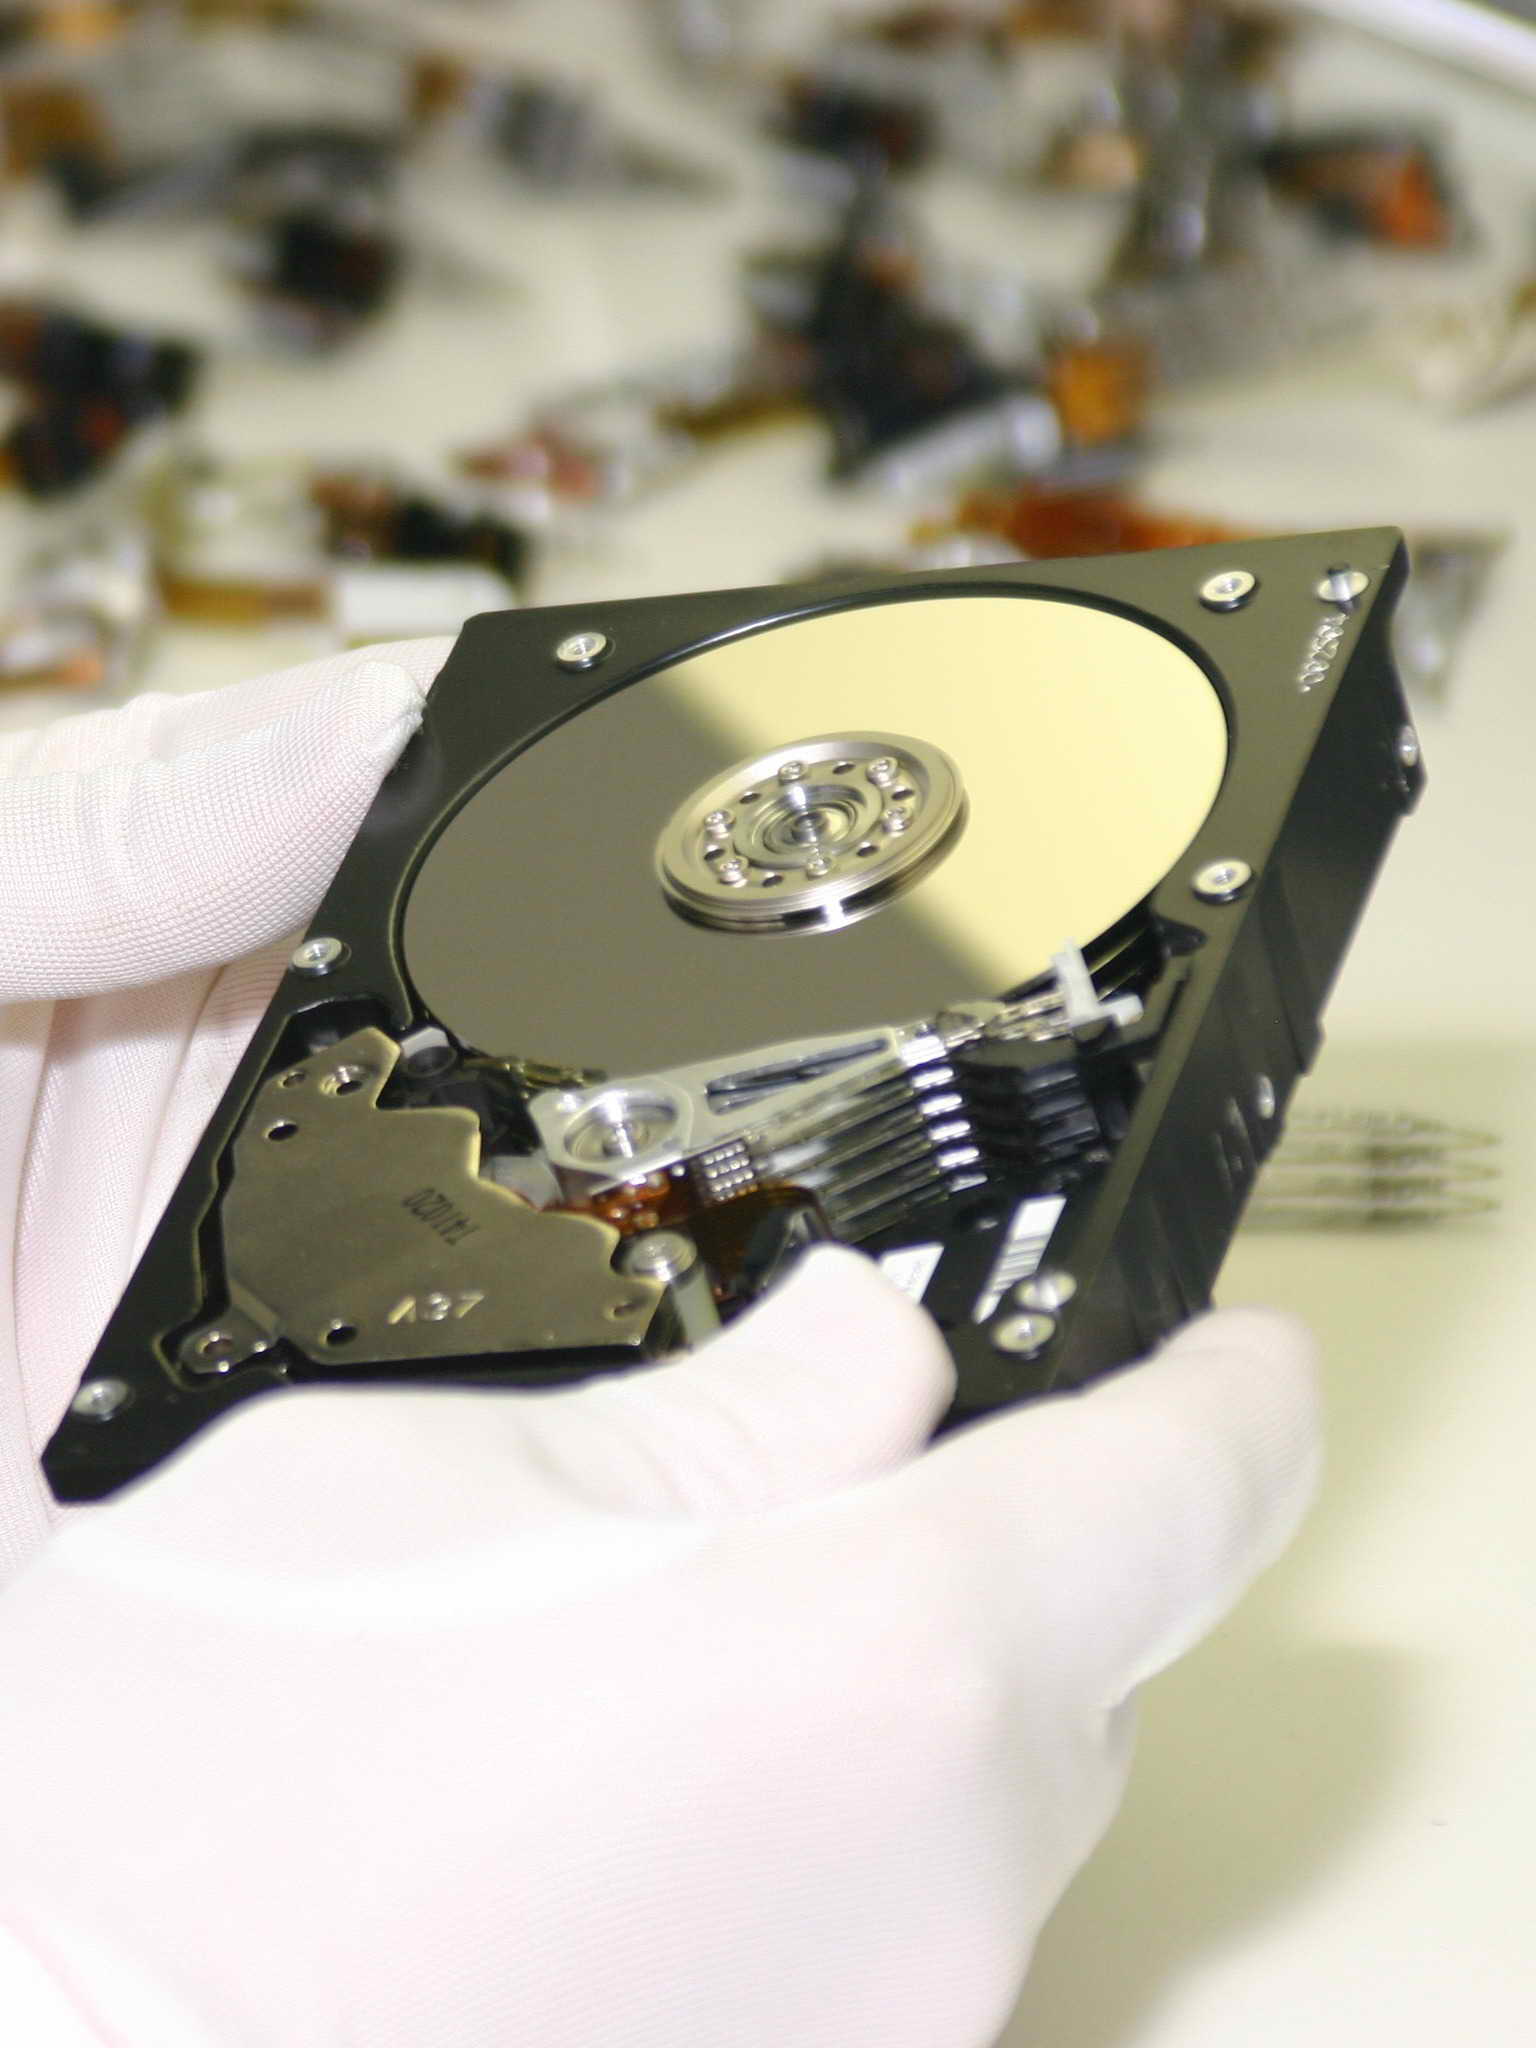 Hard Disk Data Recovery